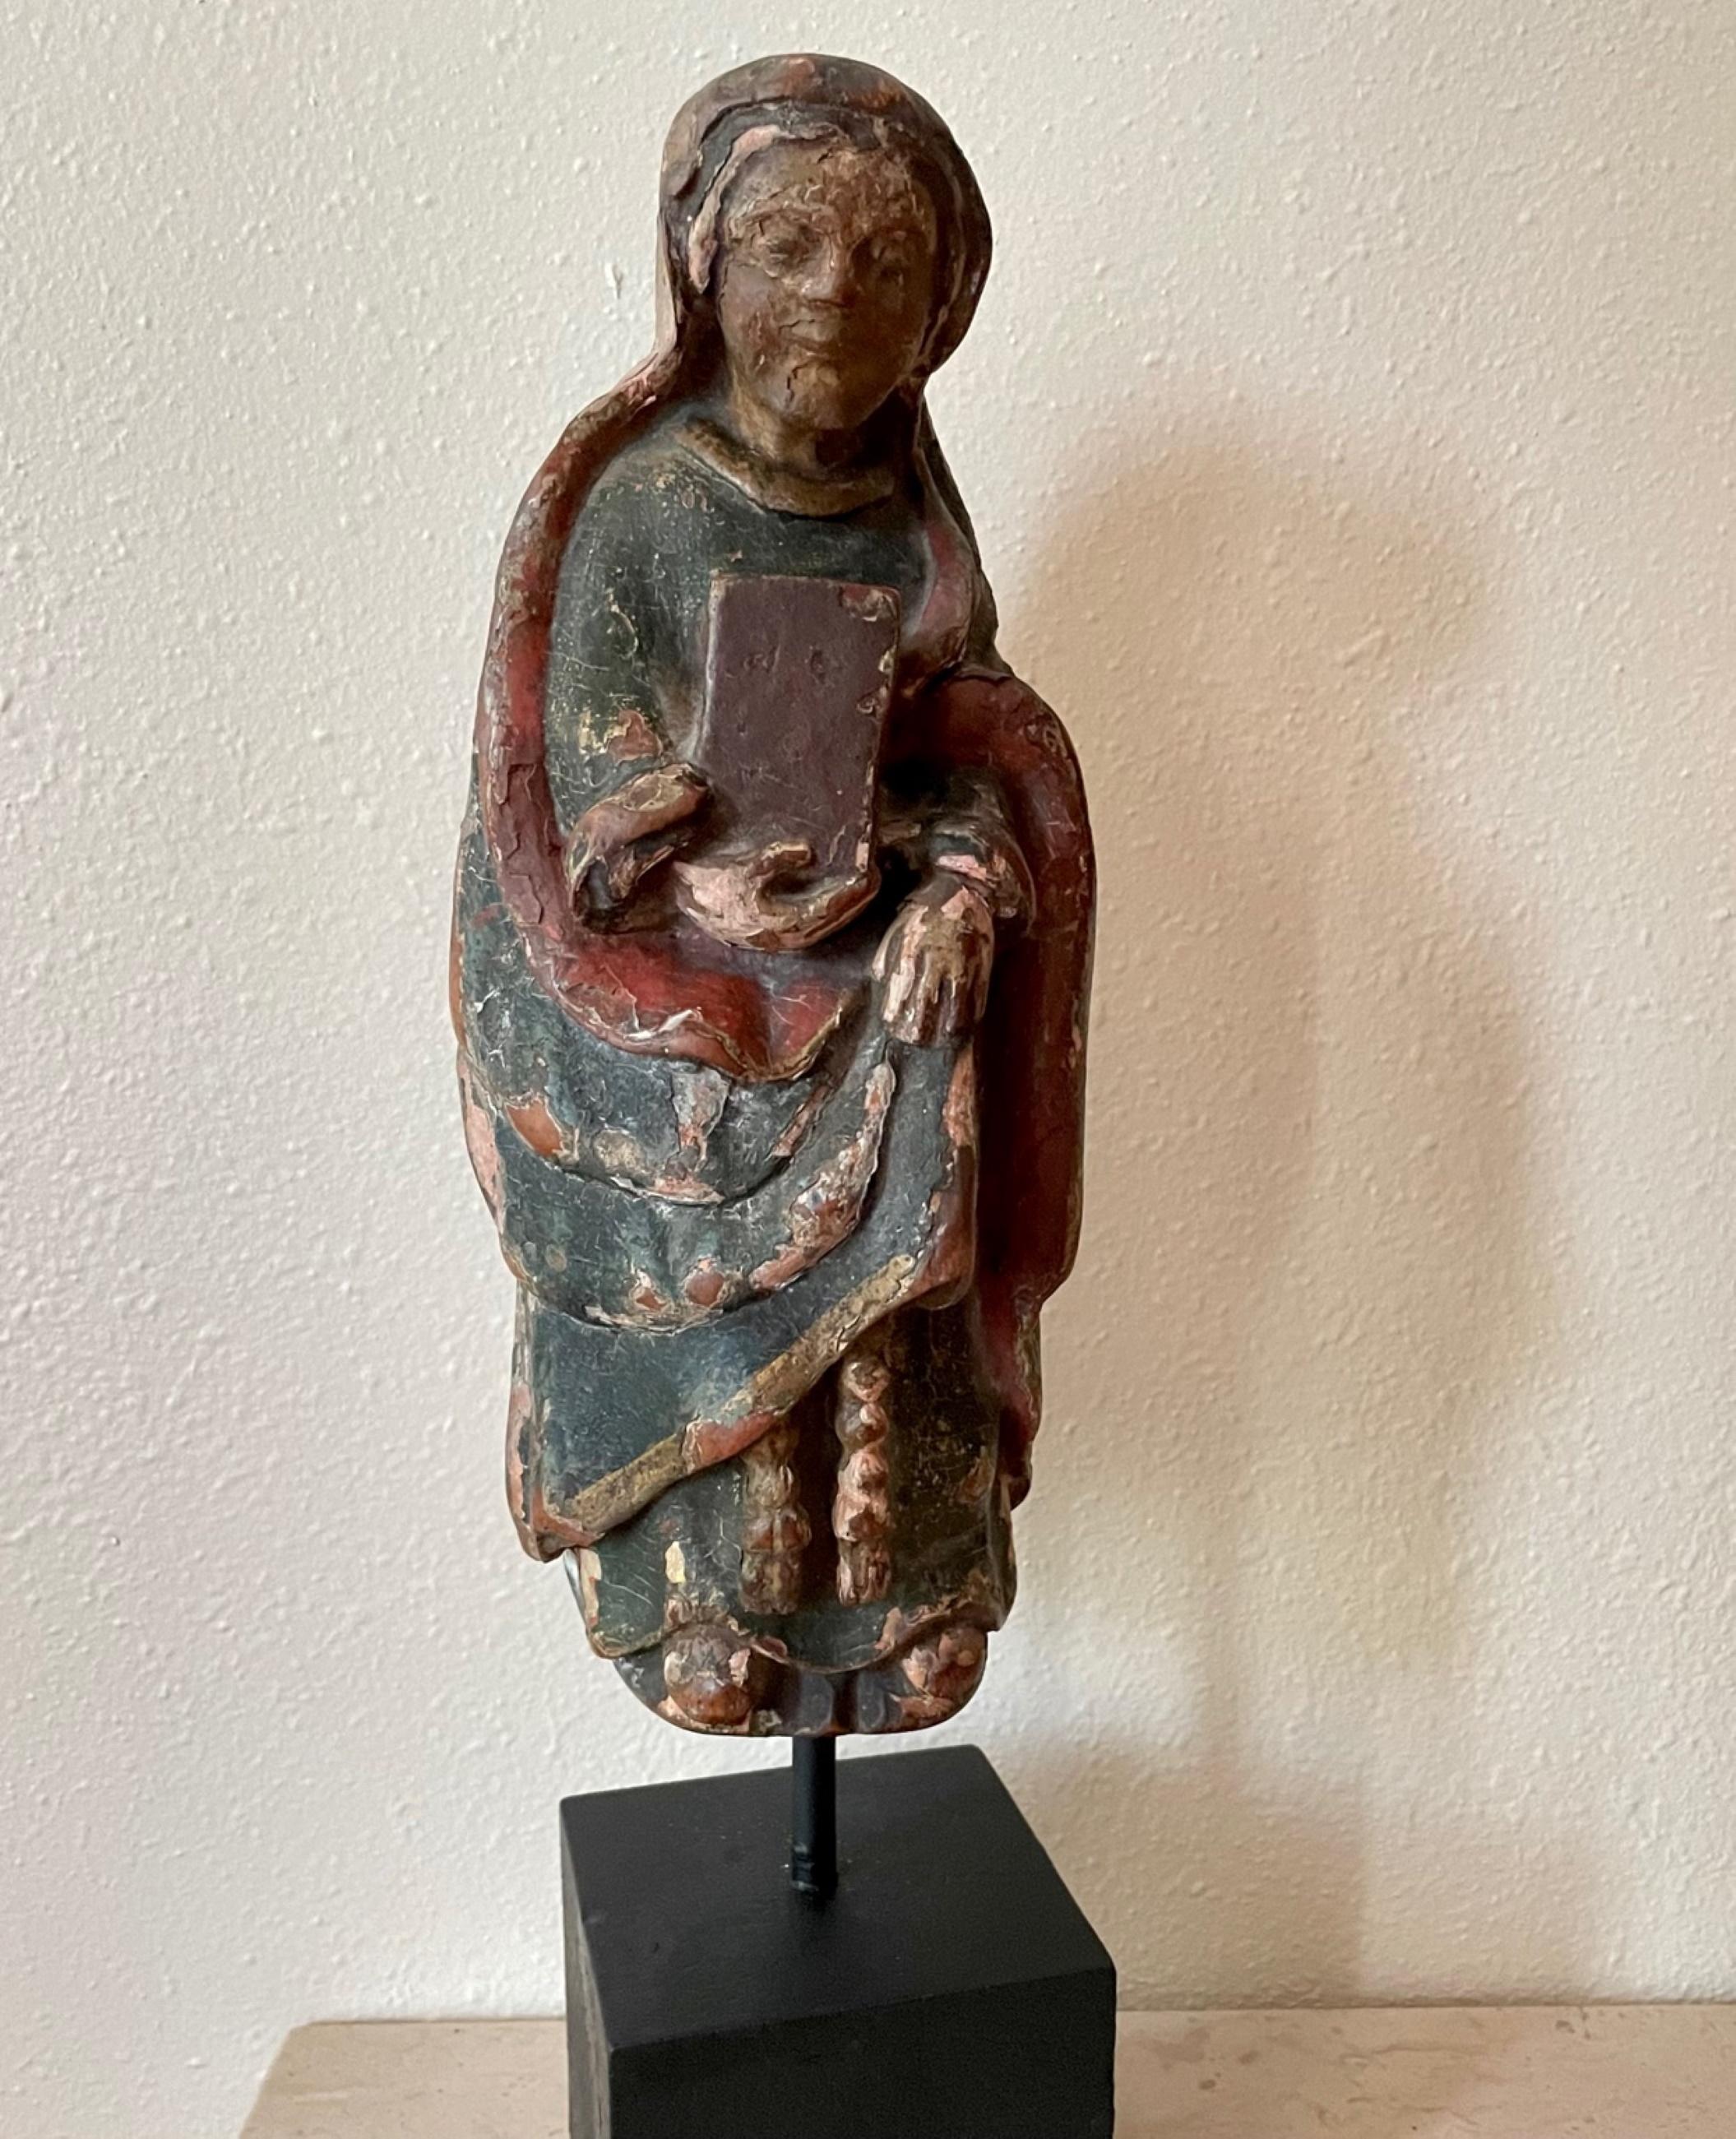 12th century extremely rare romanesque wood sculpture of the Virgin Mary.

Magnificent wood hand carved sculpture of the Virgin Mary holding a book to her chest. 
It is an extremely rare survivor of the 12th century. The style is European, possibly